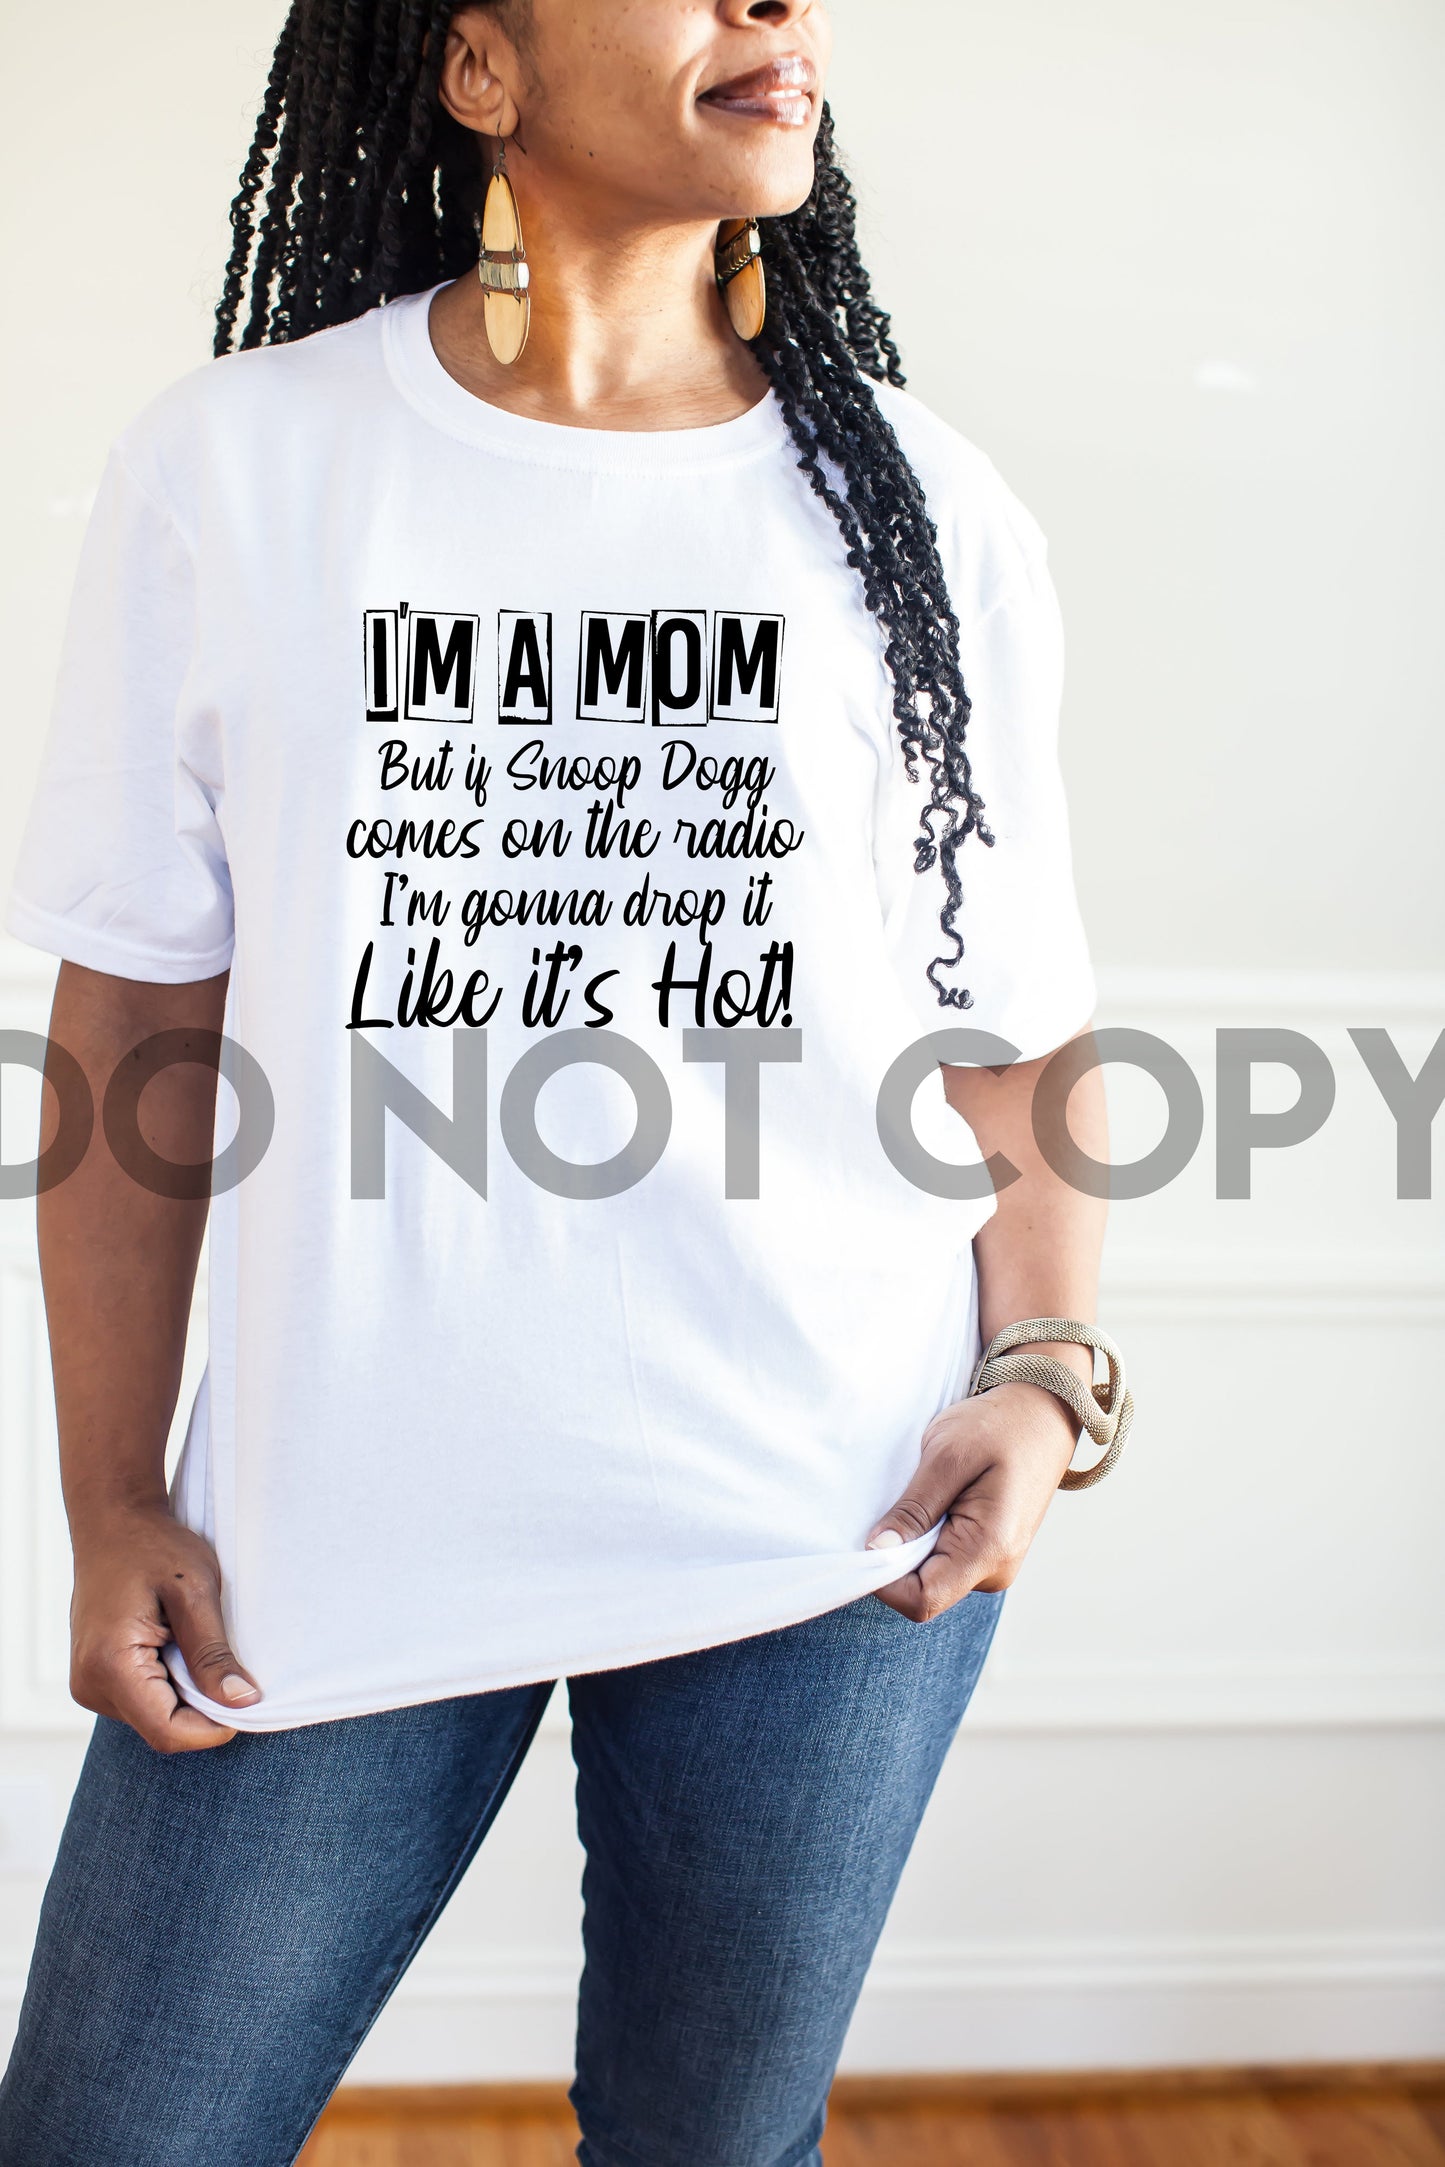 I'm a Mom but if Snoop Dogg comes on the Radio I'm gonna drop it like it’s hot Dream Print or Sublimation Print